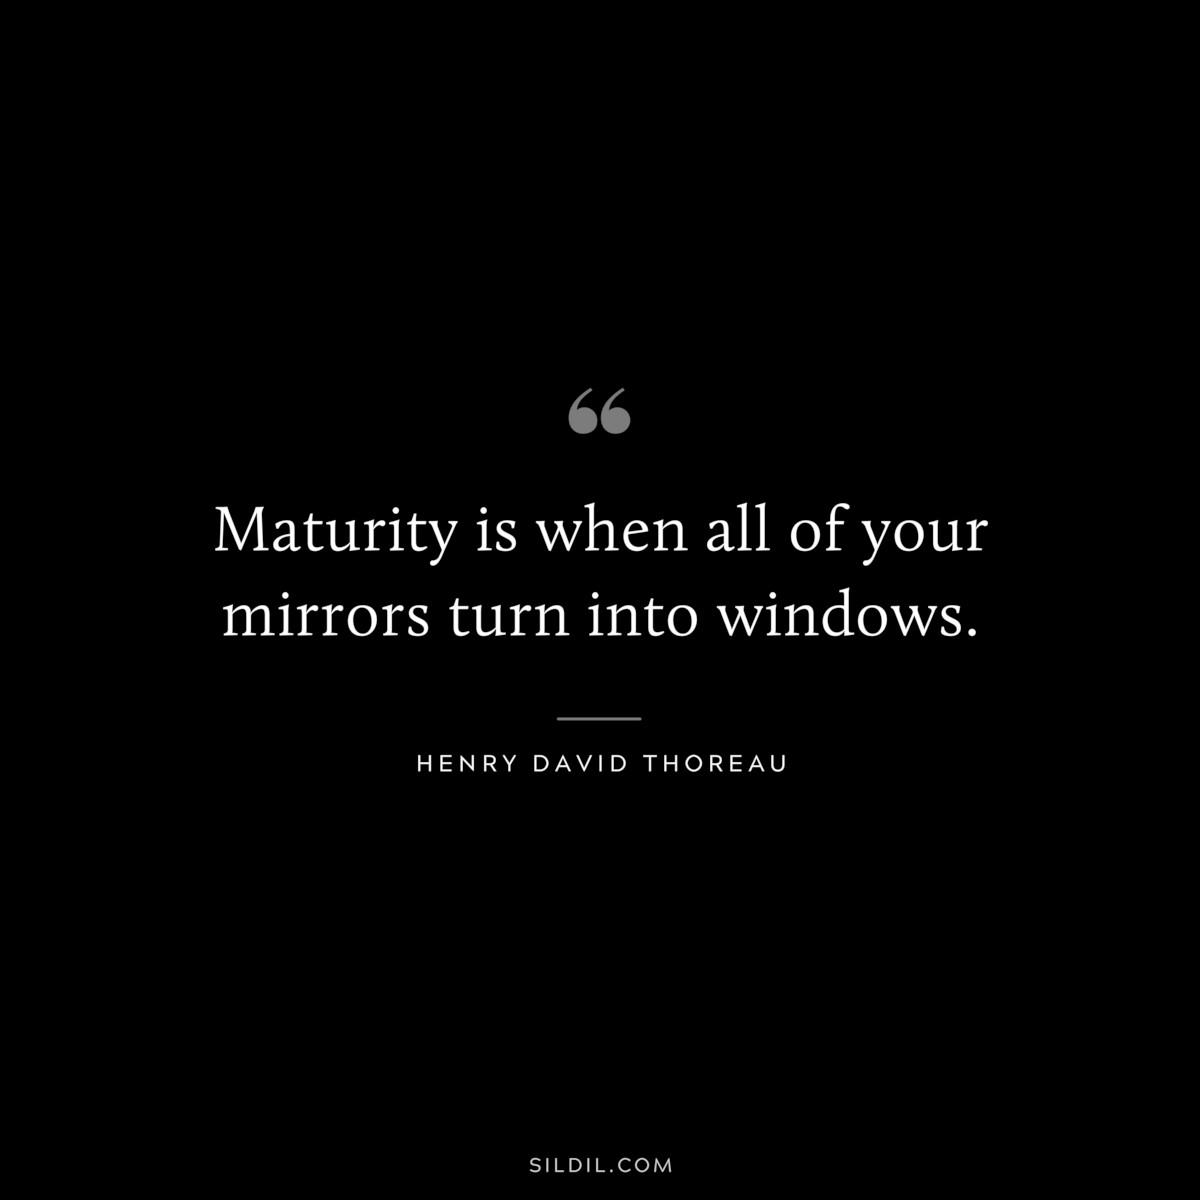 Maturity is when all of your mirrors turn into windows. — Henry David Thoreau